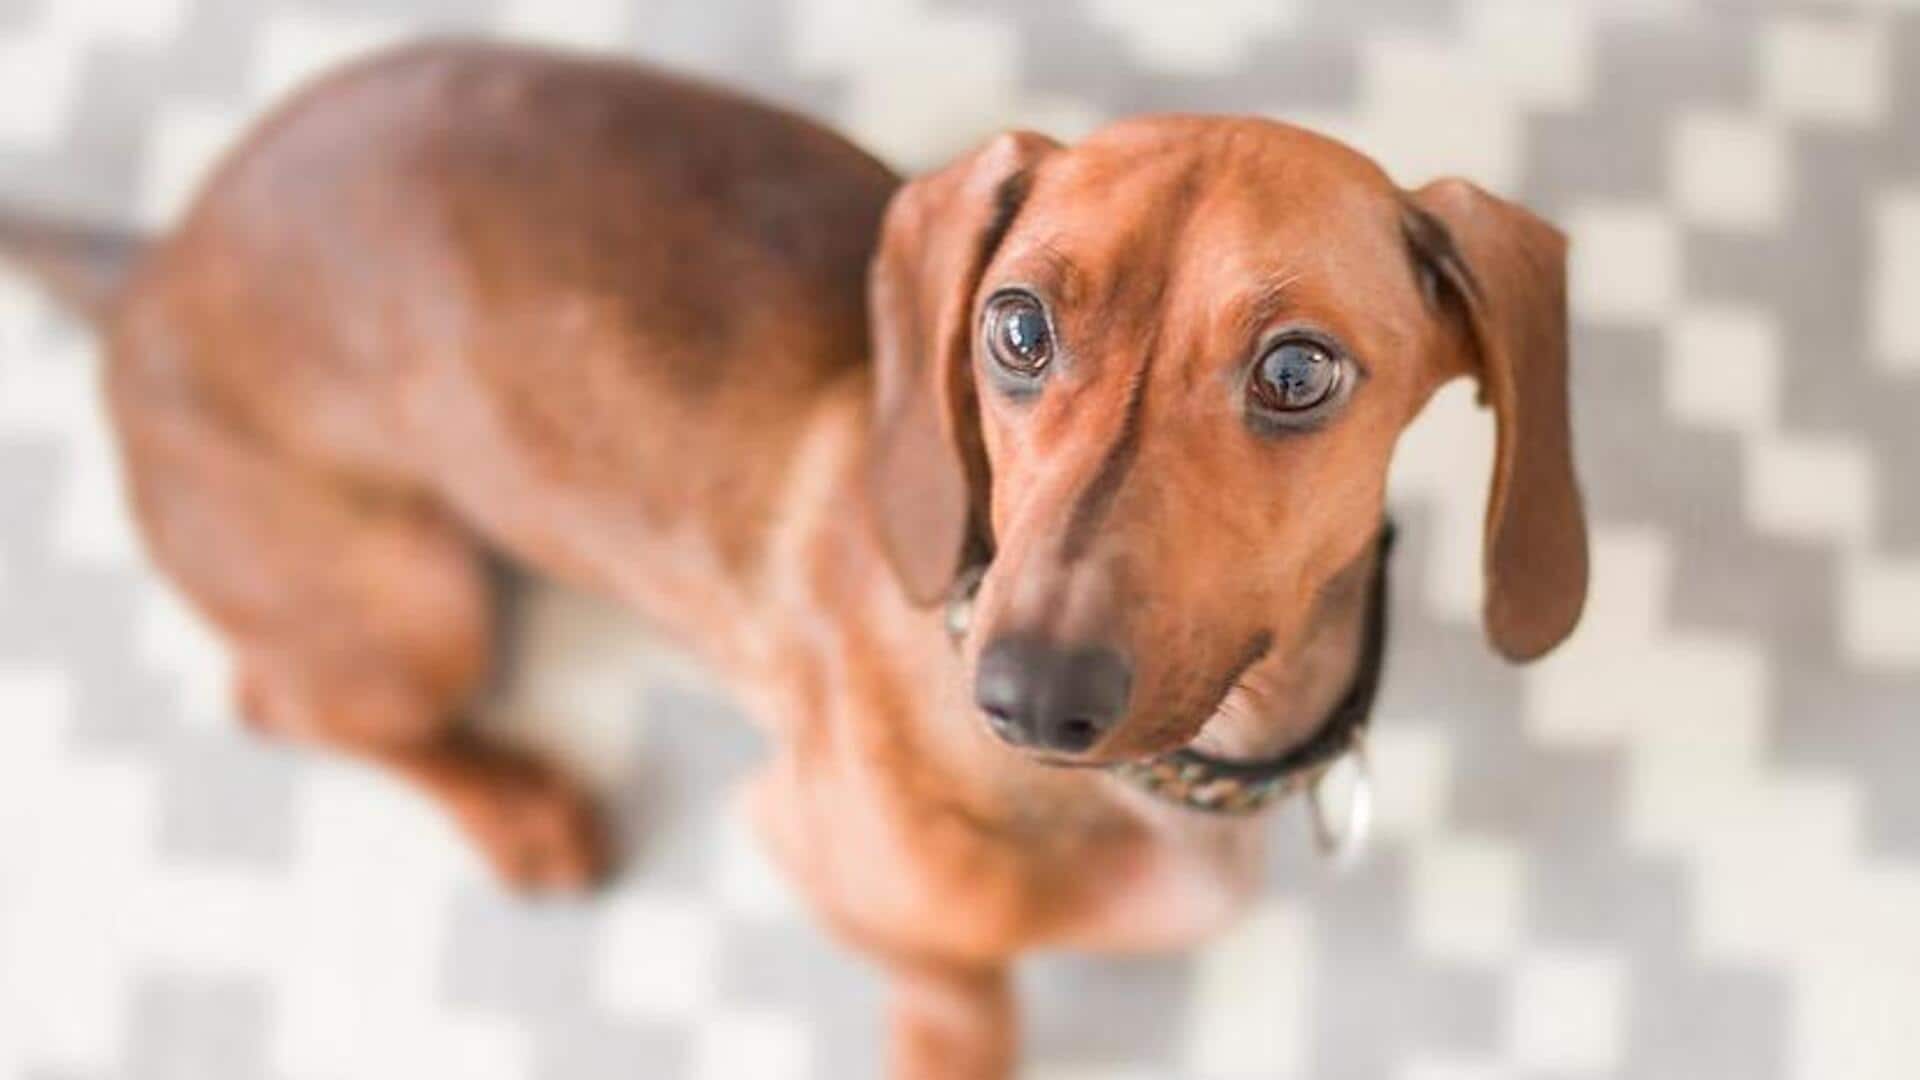 Tips to strengthen your Dachshund's back health